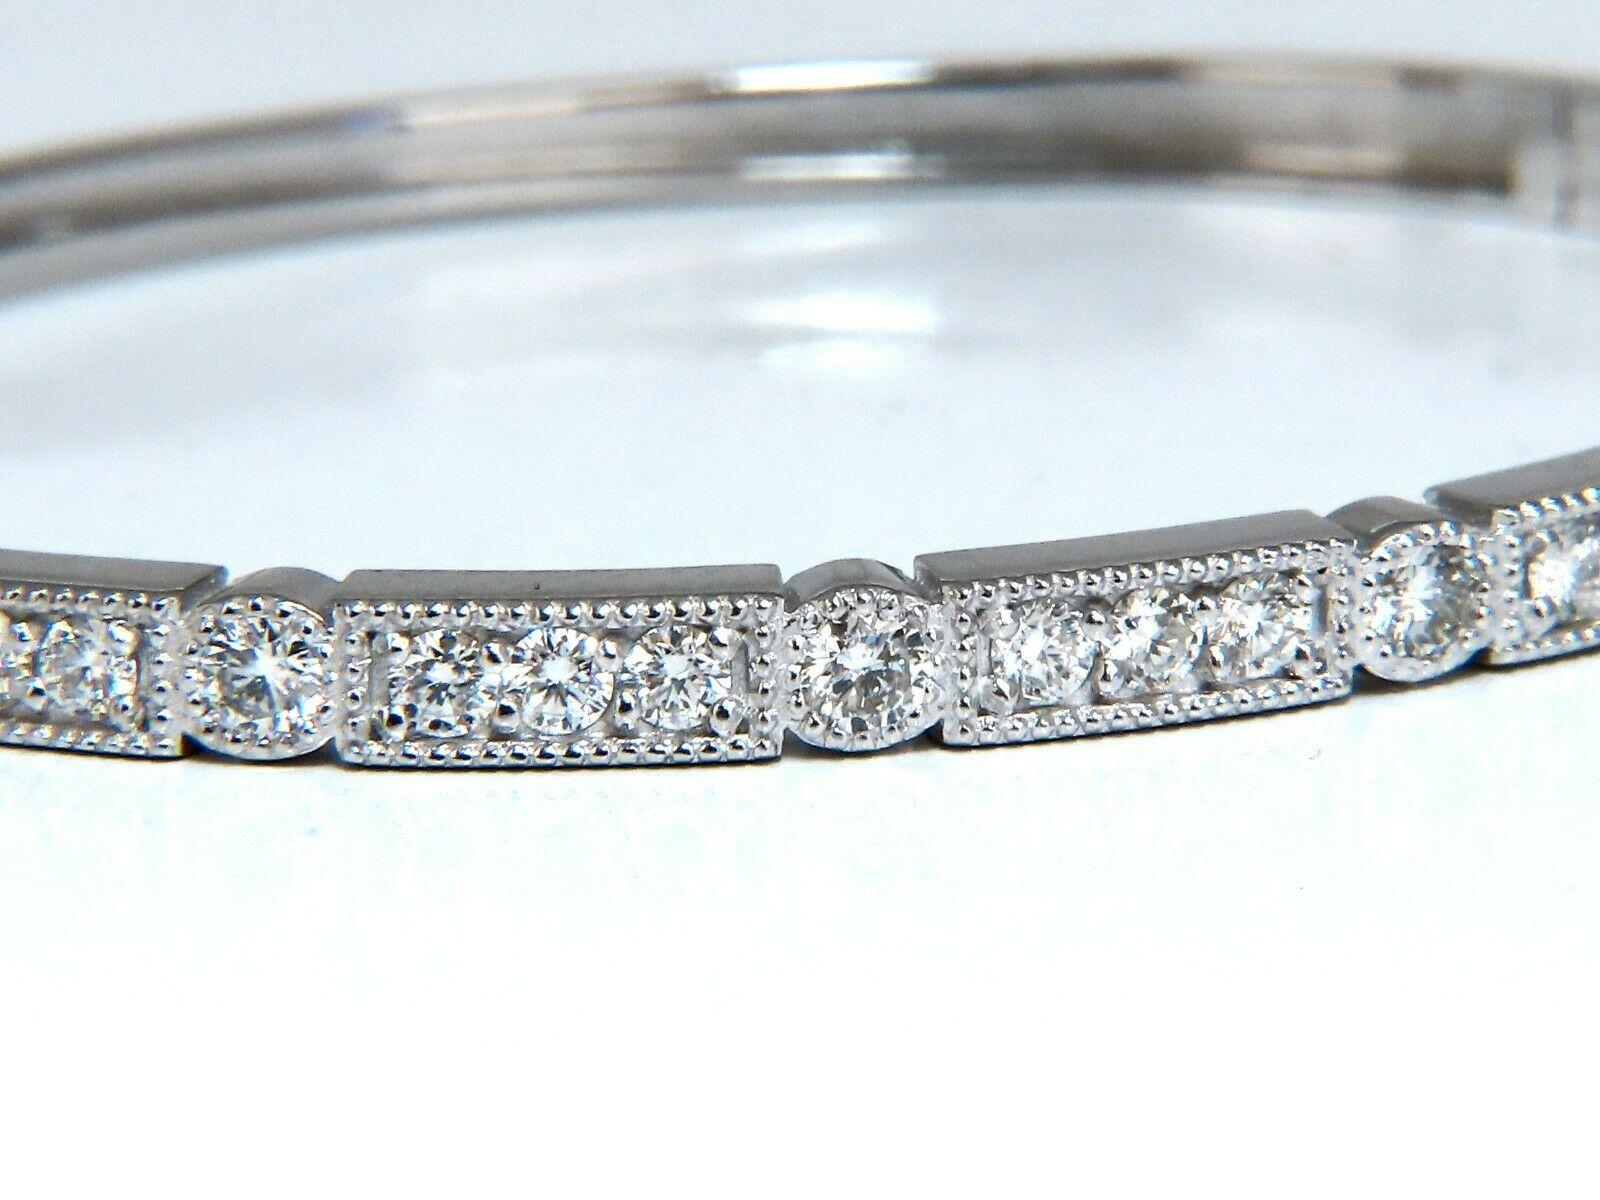 1.60ct natural diamonds bangle bracelet

Edwardian Era Design

Rounds & Full cut.

G-color & Vs-2 clarity.

14kt. white gold 

11.6 Grams.

3.7 mm wide

7  inch (wearable length)

Inner bangle measures: 2 x 2.2 Inch

Secure Lock, safety catch and